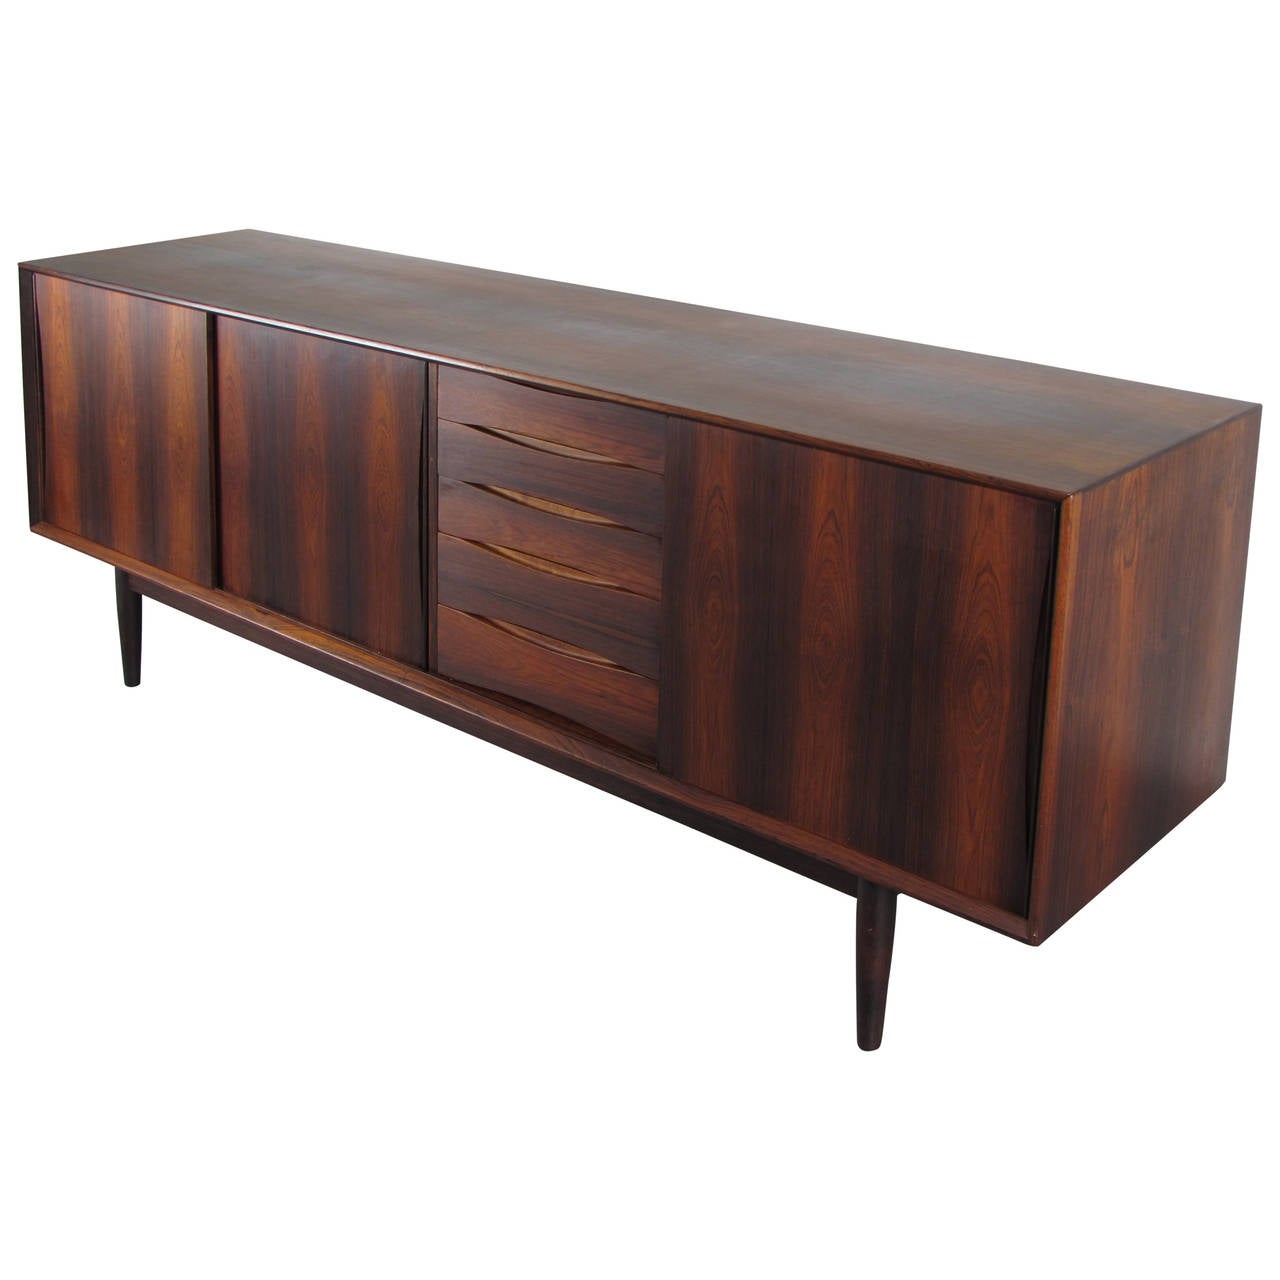 Exceptional Danish Modern Bookmatched Rosewood Buffet With Sliding